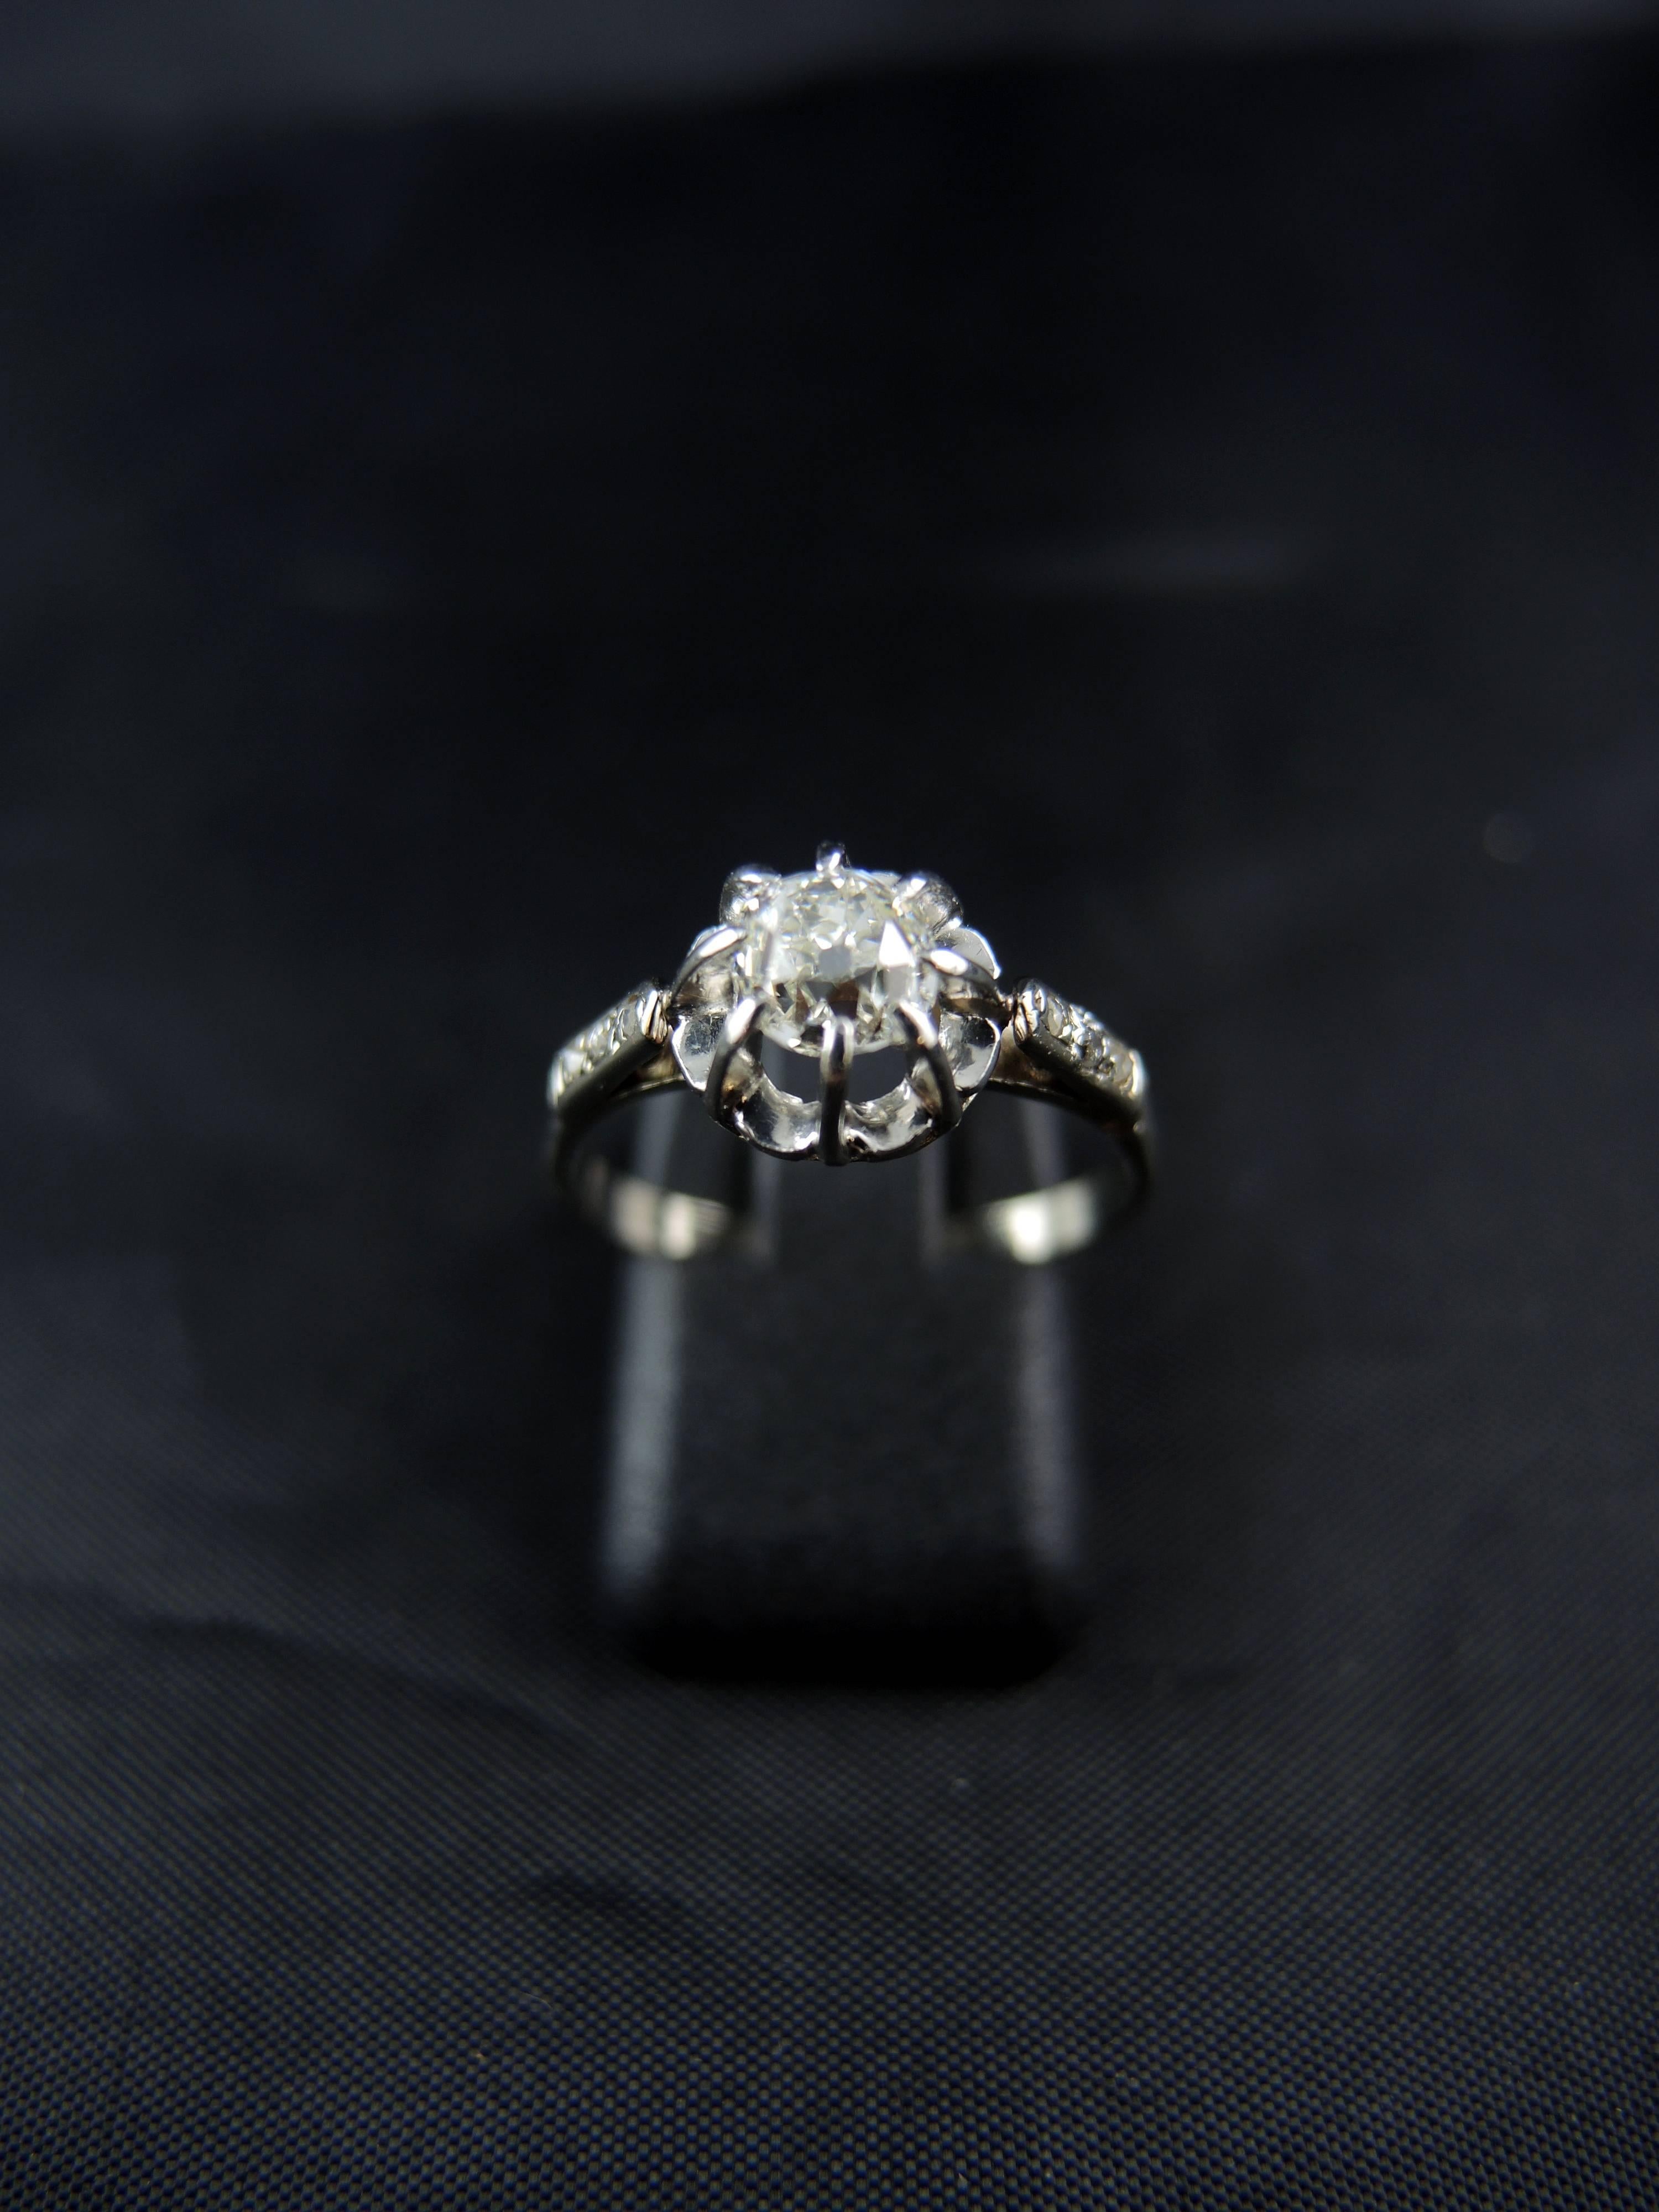 Engagment solitaire white gold and platinium ring (quality mark: owl and mascaron) set with a central old cut diamond, which weight is estimated around 0.50 Ct, and rose cut diamonds.

Circa 1930, Art Deco.

Weight: 2,40g
Ring size: 54 (diameter